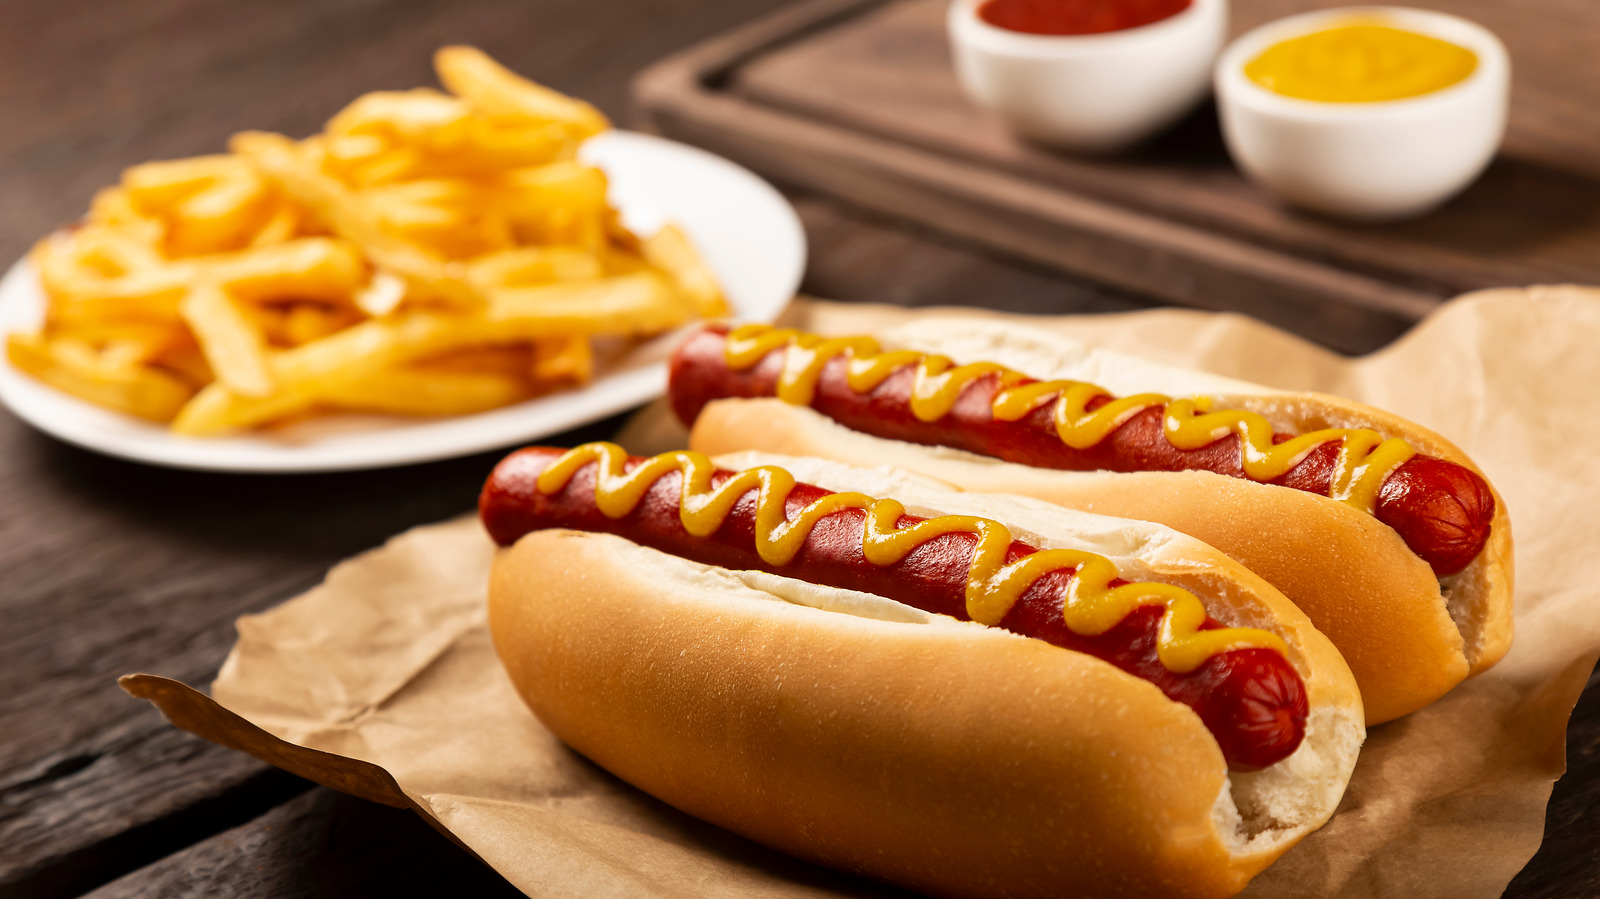 Dig Into These 6 Gourmet Hot Dogs - Hour Detroit Magazine